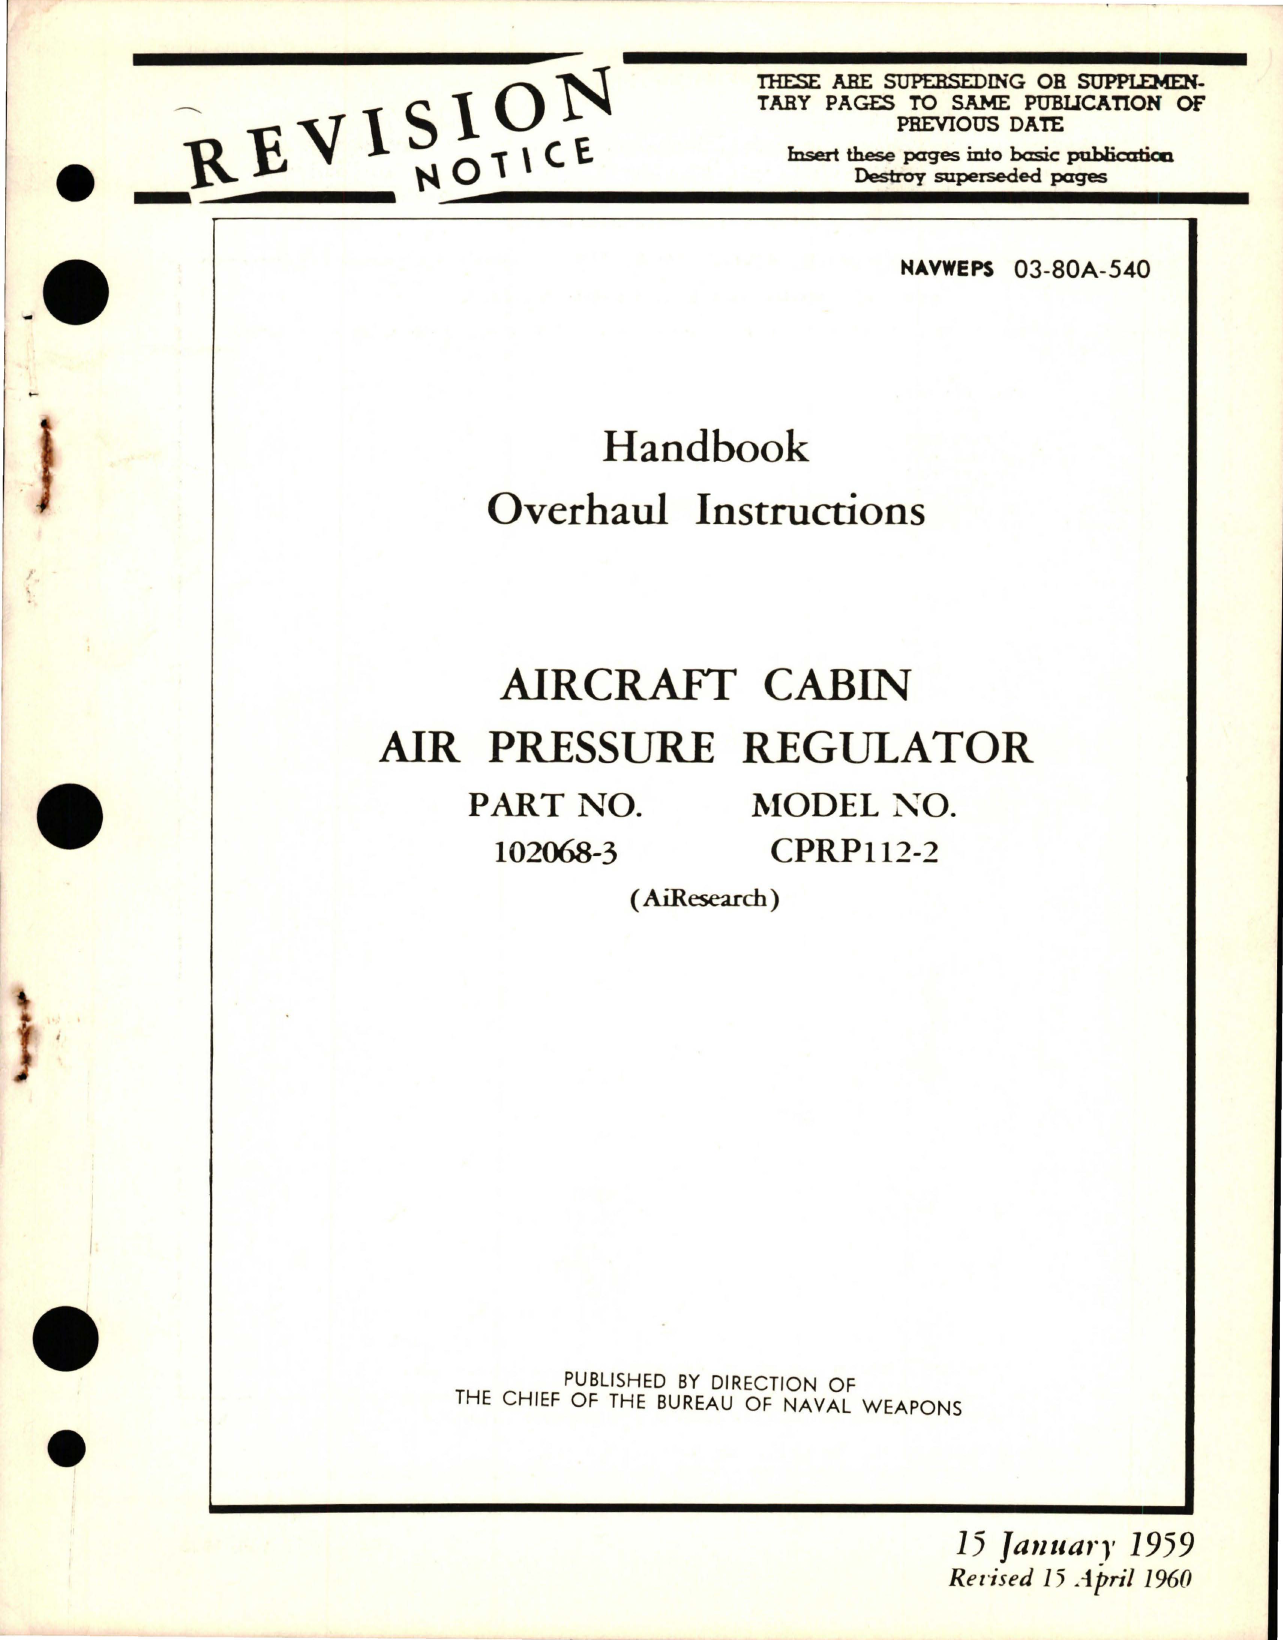 Sample page 1 from AirCorps Library document: Overhaul Instructions for Aircraft Cabin Air Pressure Regulator - Part 102068-3 - Model CPRP112-2 